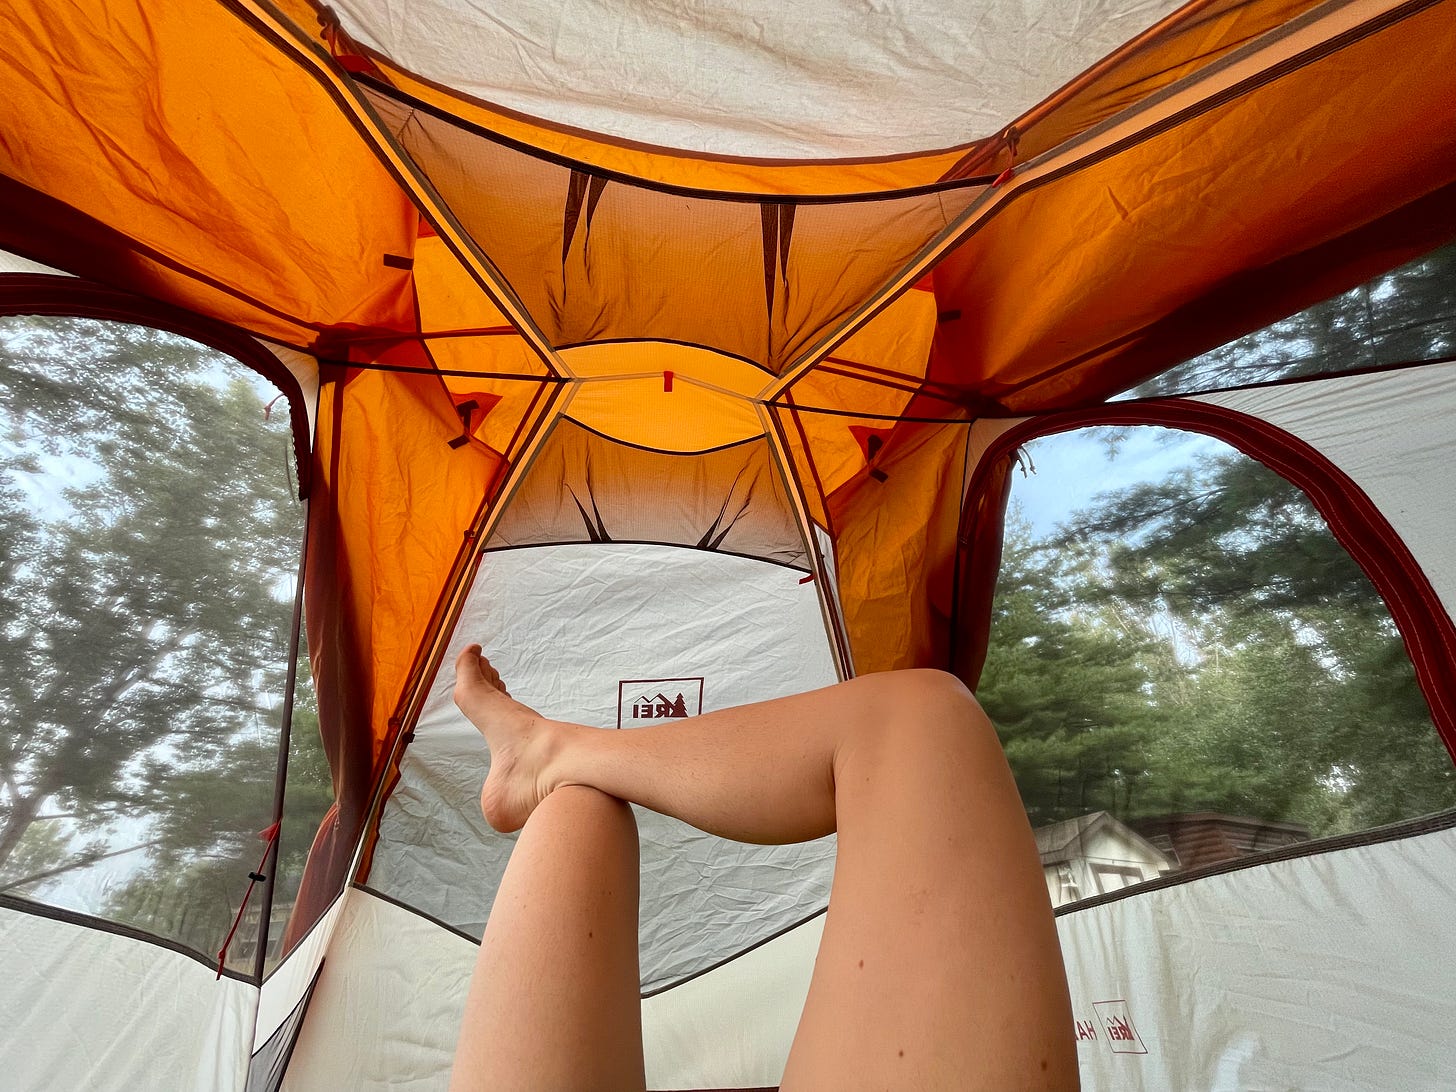 Photograph of the inside of a tent, with someone's legs visible.